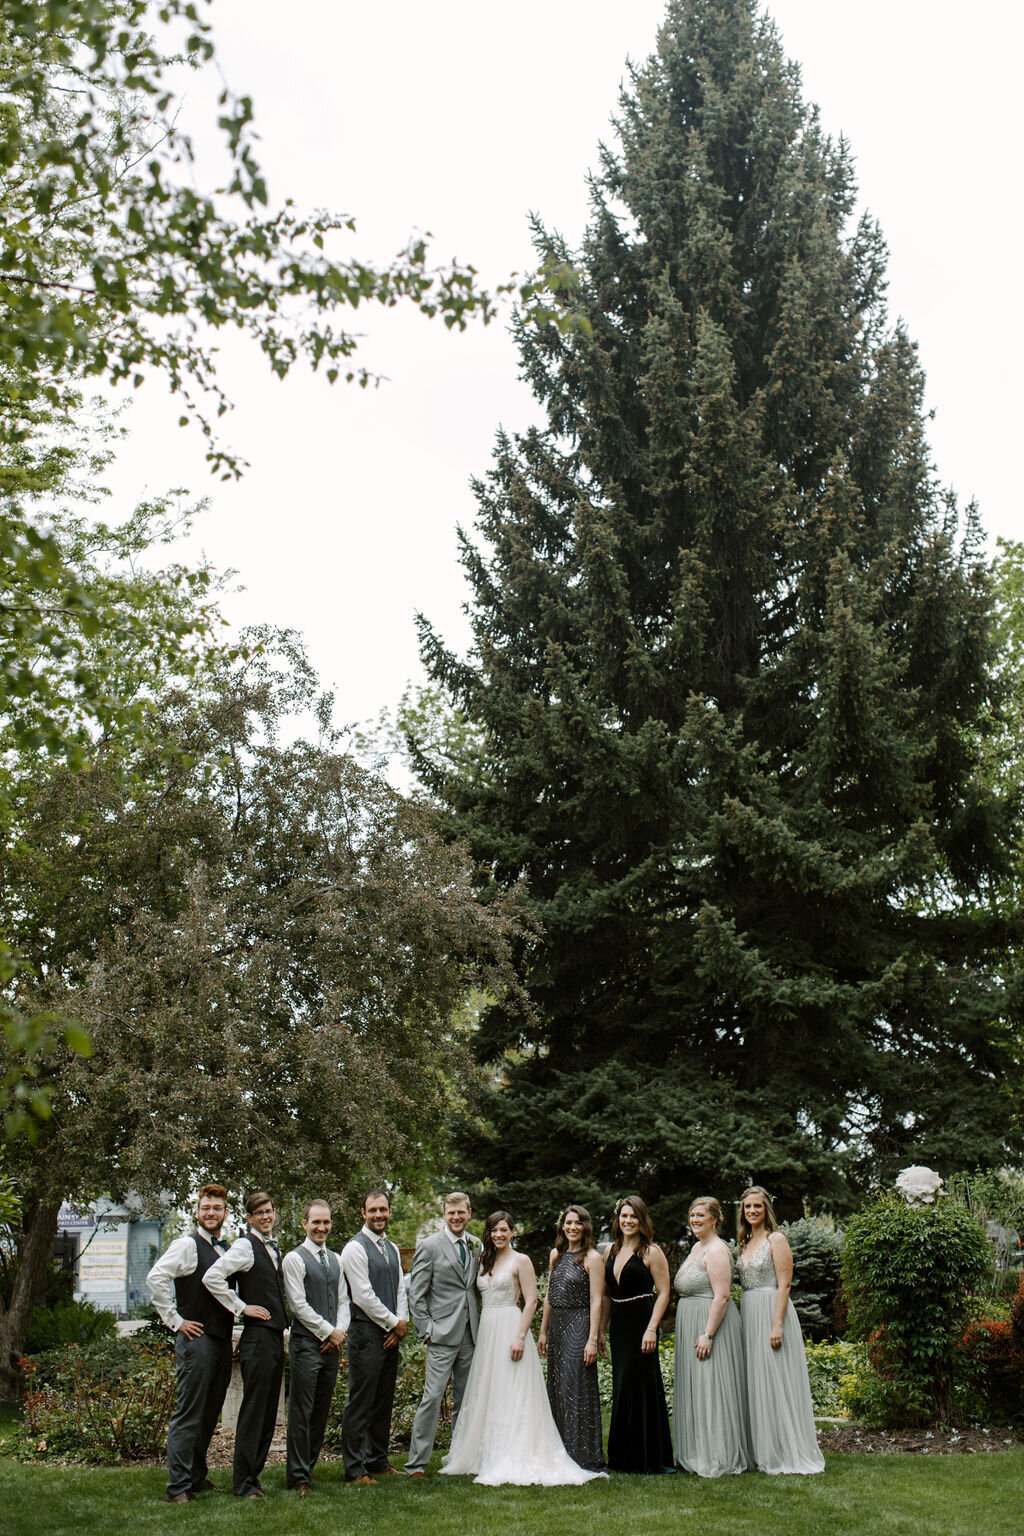 Outdoor wedding portraits at the St Vrain